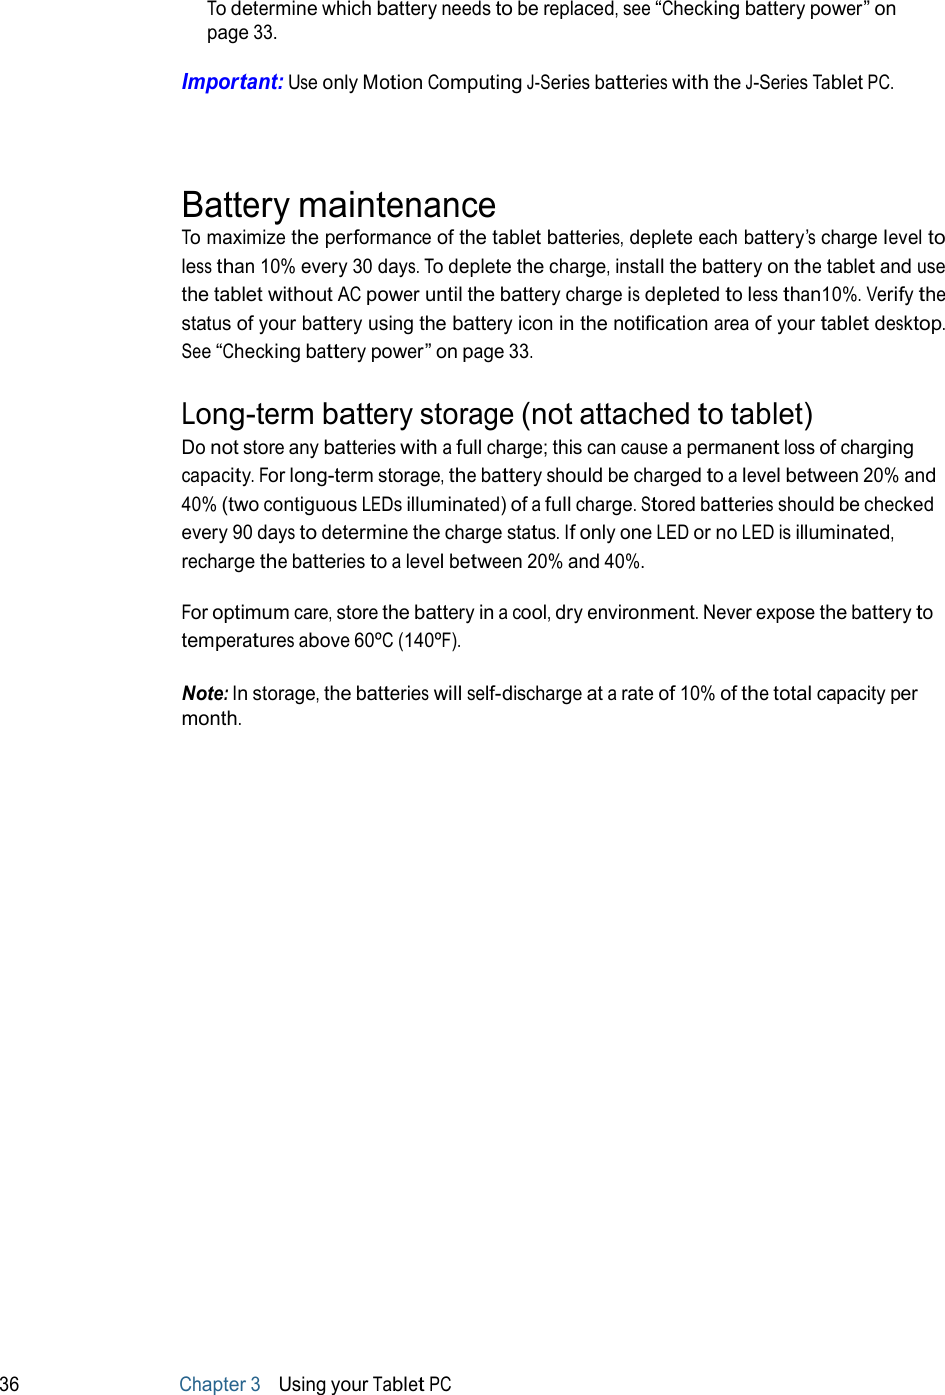 To determine which battery needs to be replaced, see “Checking battery power” on page 33.  Important: Use only Motion Computing J-Series batteries with the J-Series Tablet PC.     Battery maintenance To maximize the performance of the tablet batteries, deplete each battery’s charge level to less than 10% every 30 days. To deplete the charge, install the battery on the tablet and use the tablet without AC power until the battery charge is depleted to less than10%. Verify the status of your battery using the battery icon in the notification area of your tablet desktop. See “Checking battery power” on page 33.  Long-term battery storage (not attached to tablet) Do not store any batteries with a full charge; this can cause a permanent loss of charging capacity. For long-term storage, the battery should be charged to a level between 20% and 40% (two contiguous LEDs illuminated) of a full charge. Stored batteries should be checked every 90 days to determine the charge status. If only one LED or no LED is illuminated, recharge the batteries to a level between 20% and 40%.  For optimum care, store the battery in a cool, dry environment. Never expose the battery to temperatures above 60ºC (140ºF).  Note: In storage, the batteries will self-discharge at a rate of 10% of the total capacity per month.                                 36 Chapter 3   Using your Tablet PC 